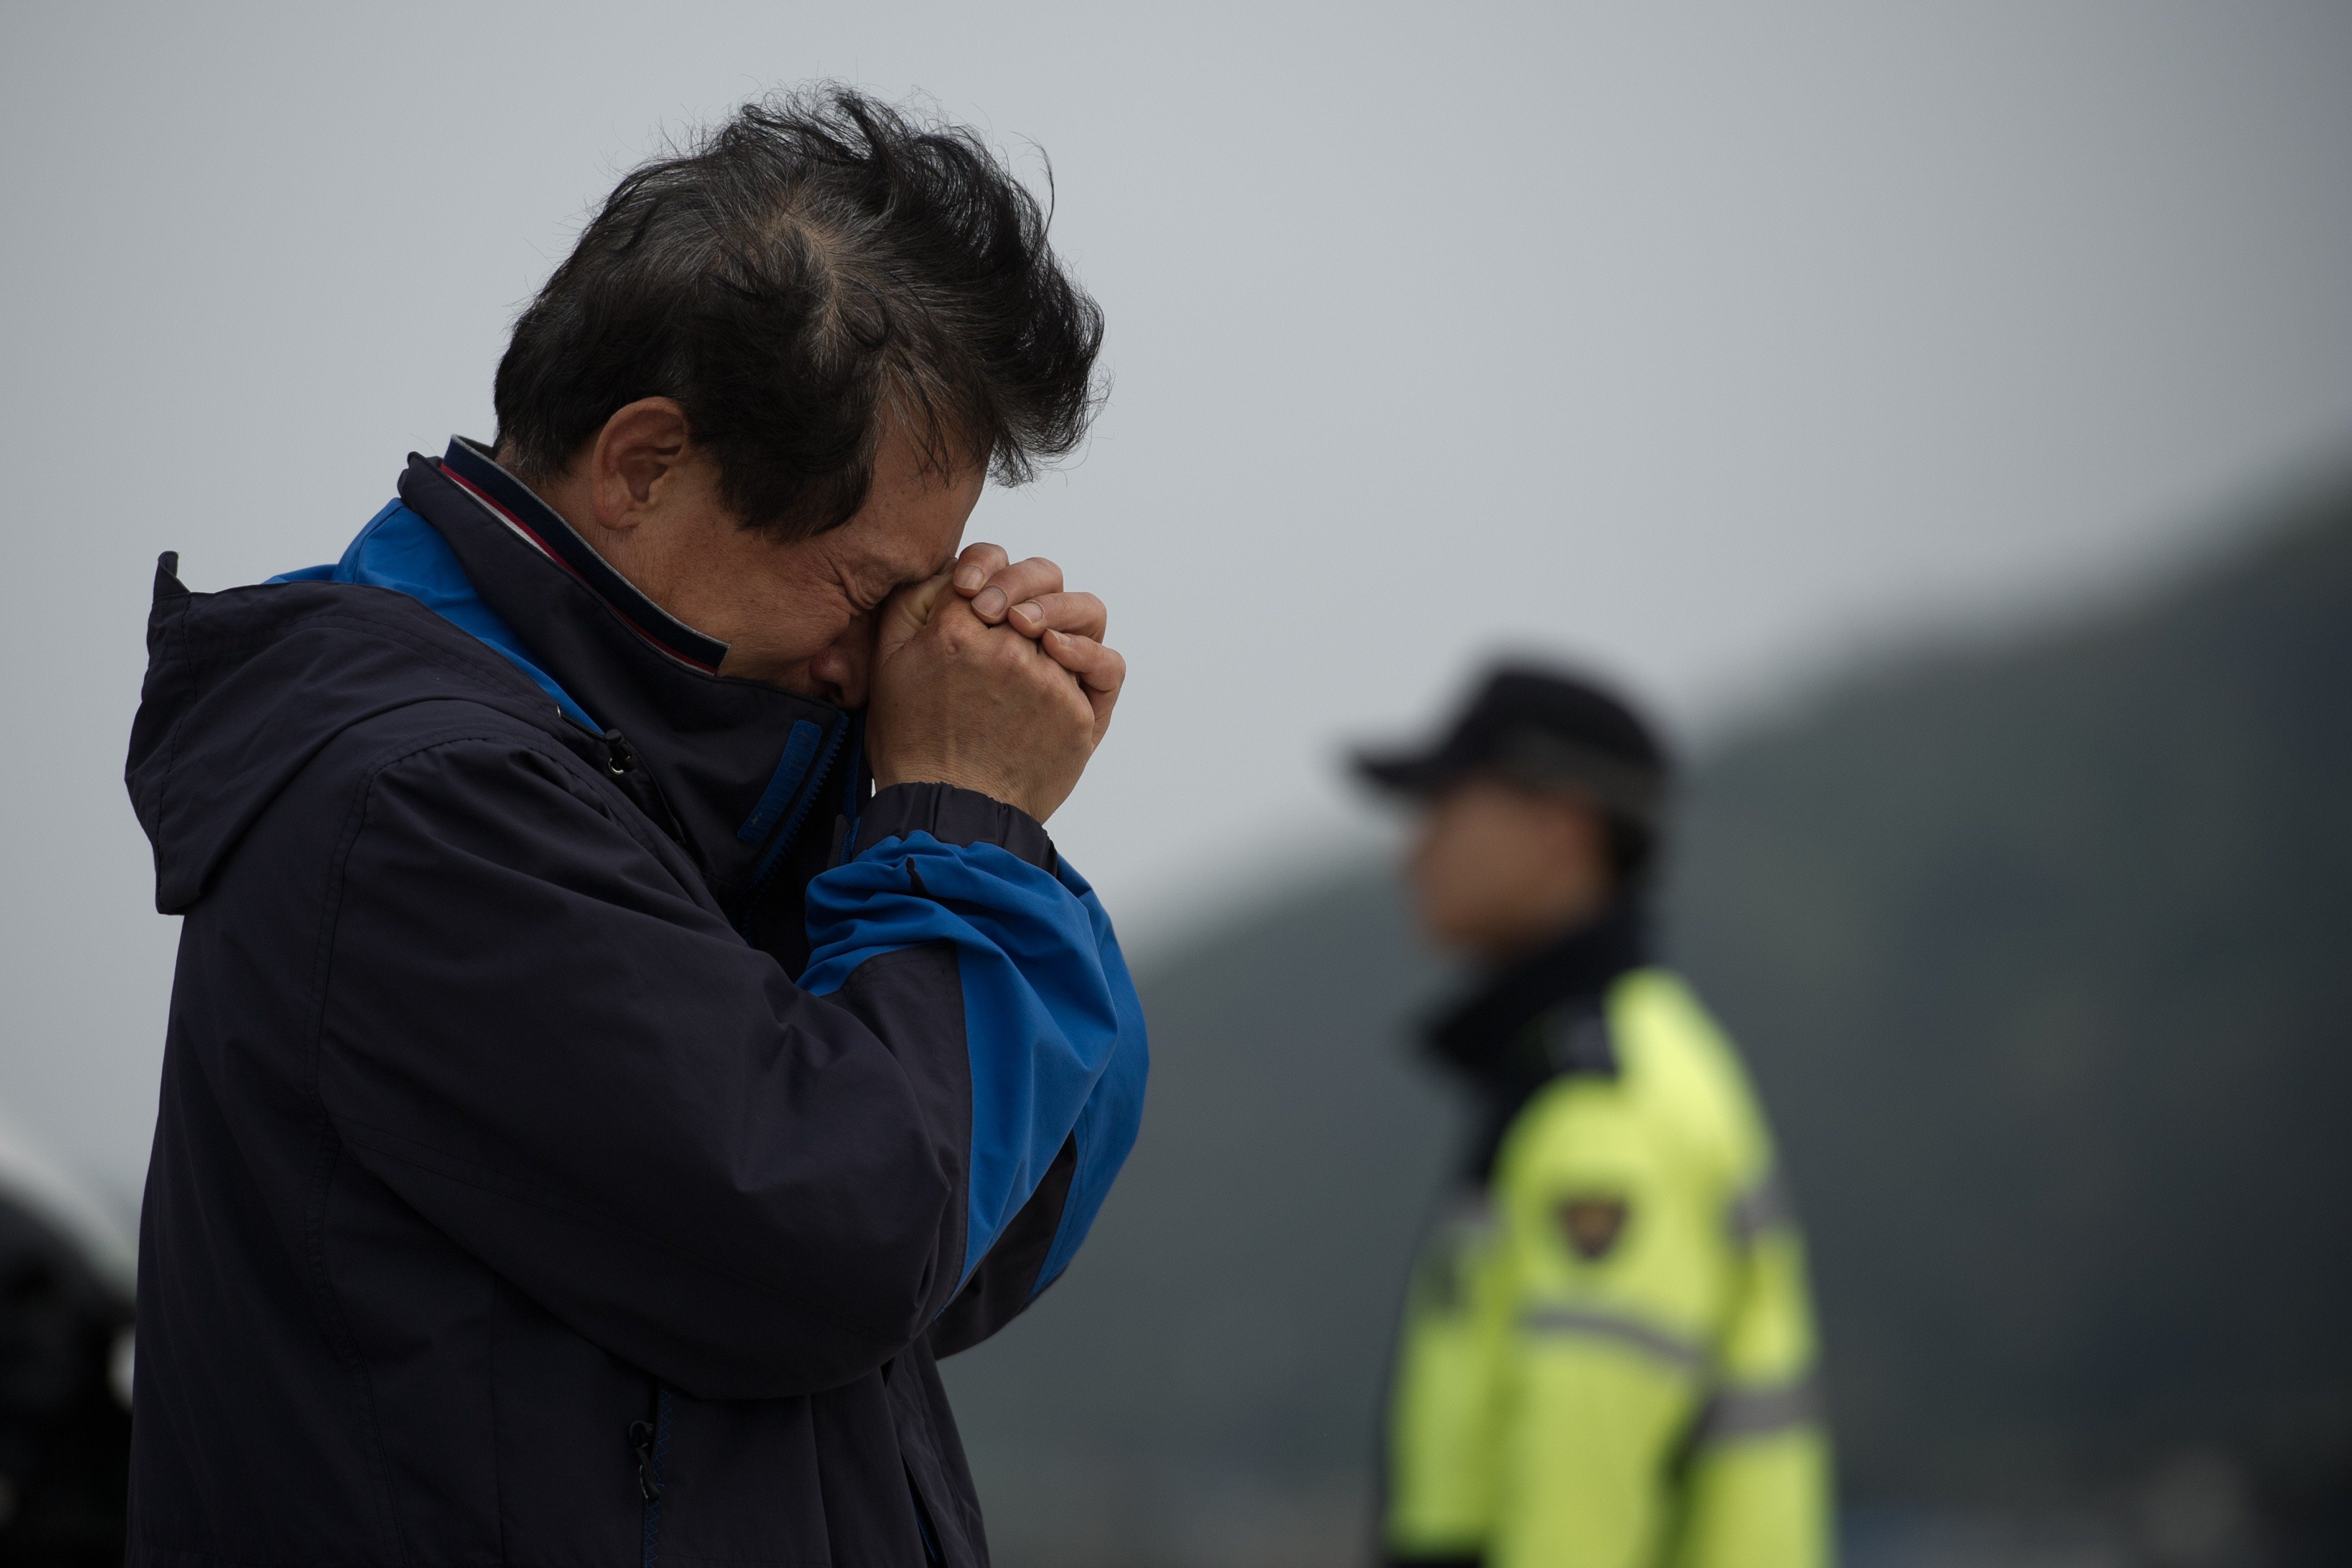 A relative weeps at an area where family members of victims of the South Korean ferry 'Sewol' are gathered, at Jindo harbour on April 21, 2014.